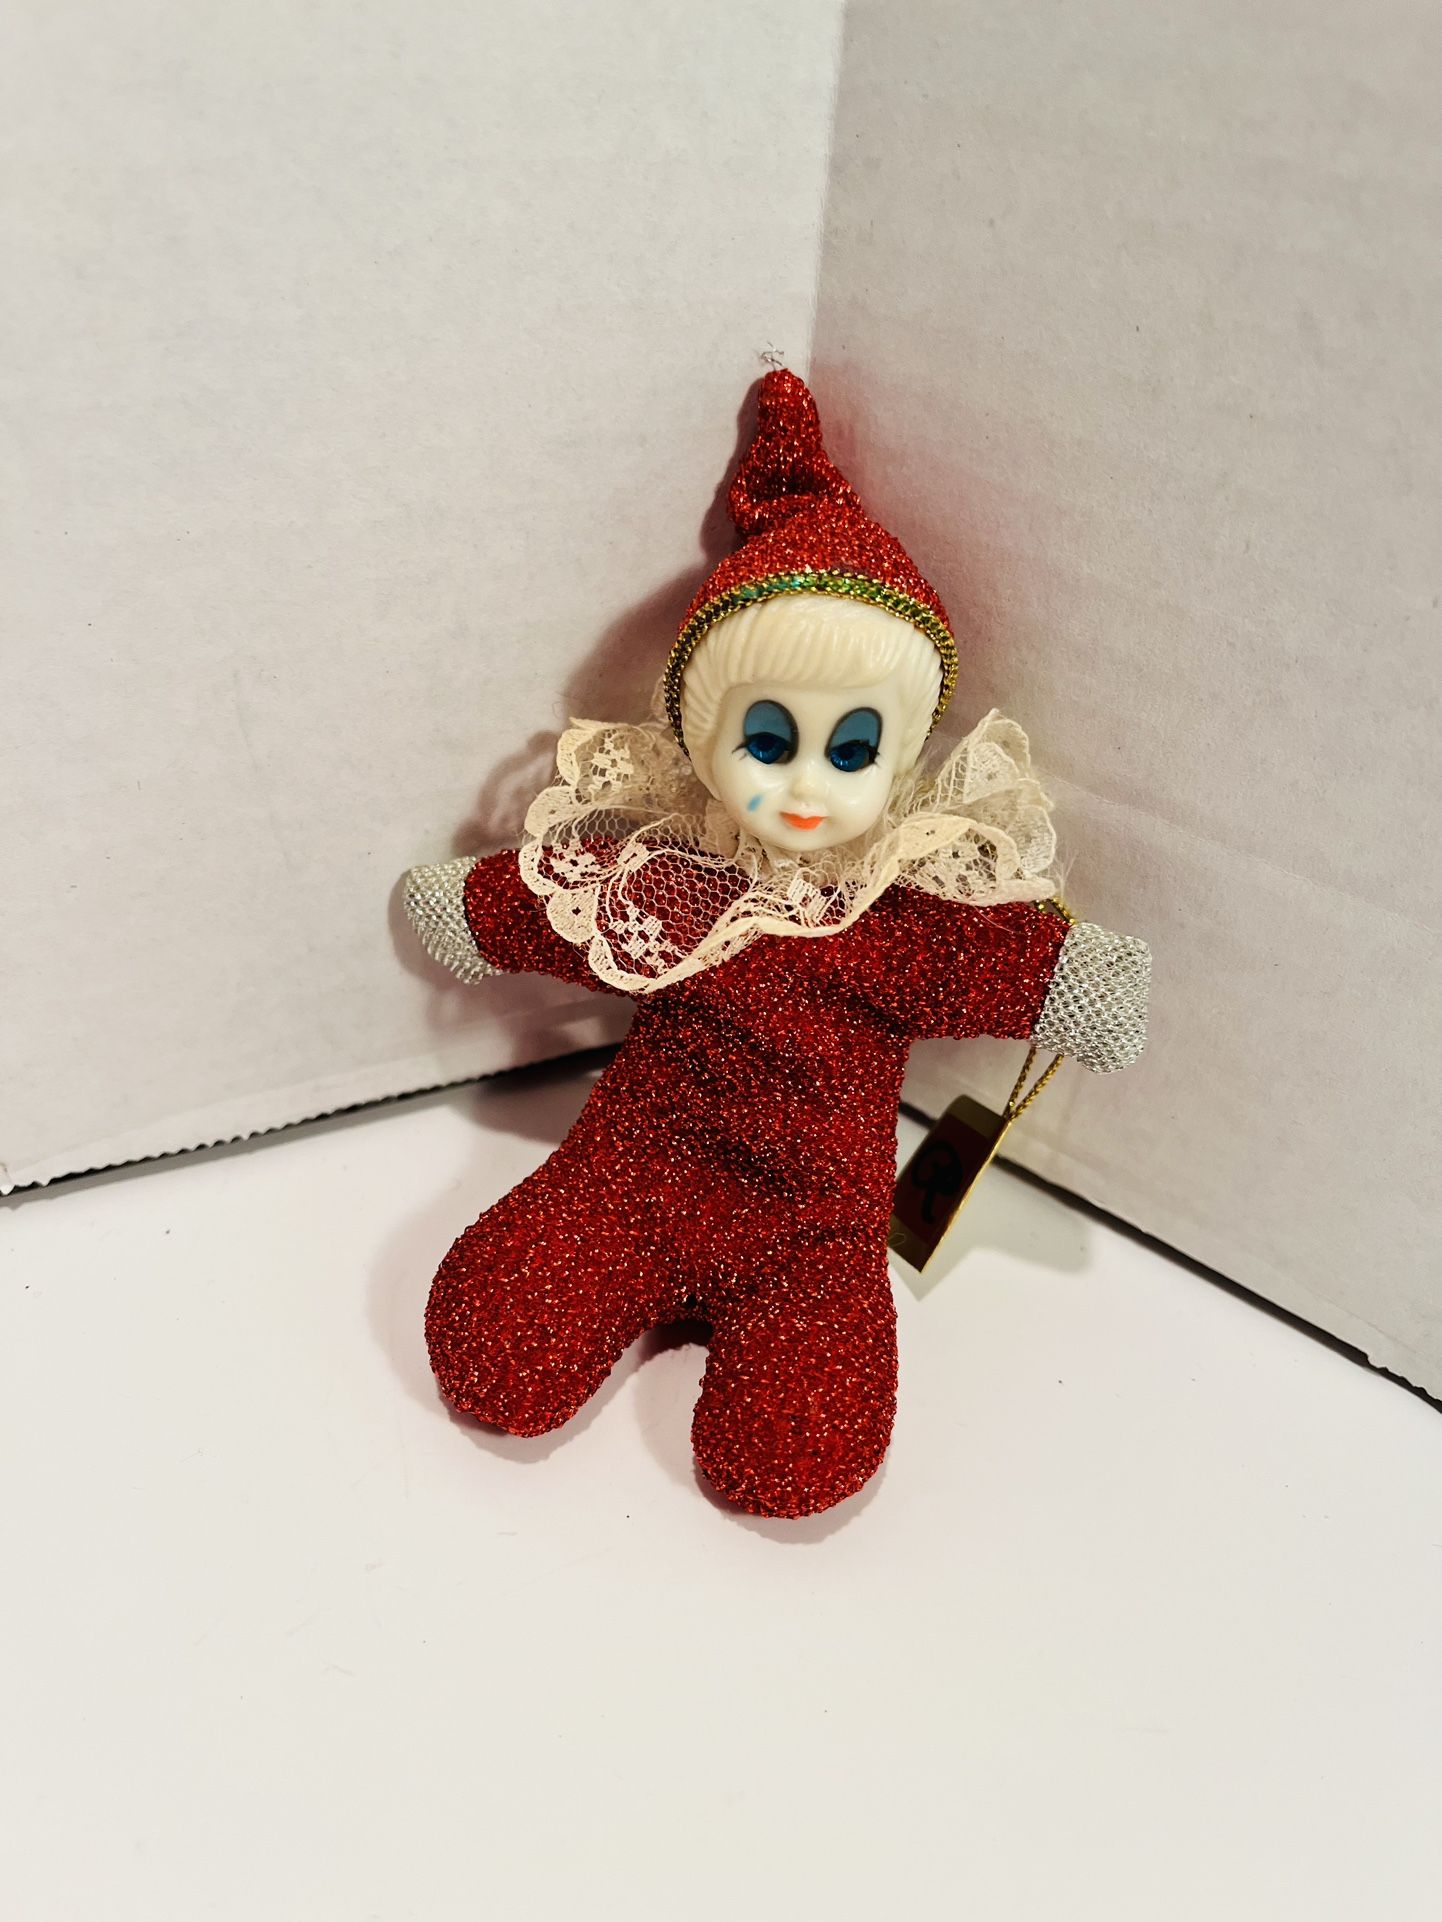 Vintage Sleepy eyes Clown Doll ornament Plastic Face / Red Outfit - Rare!